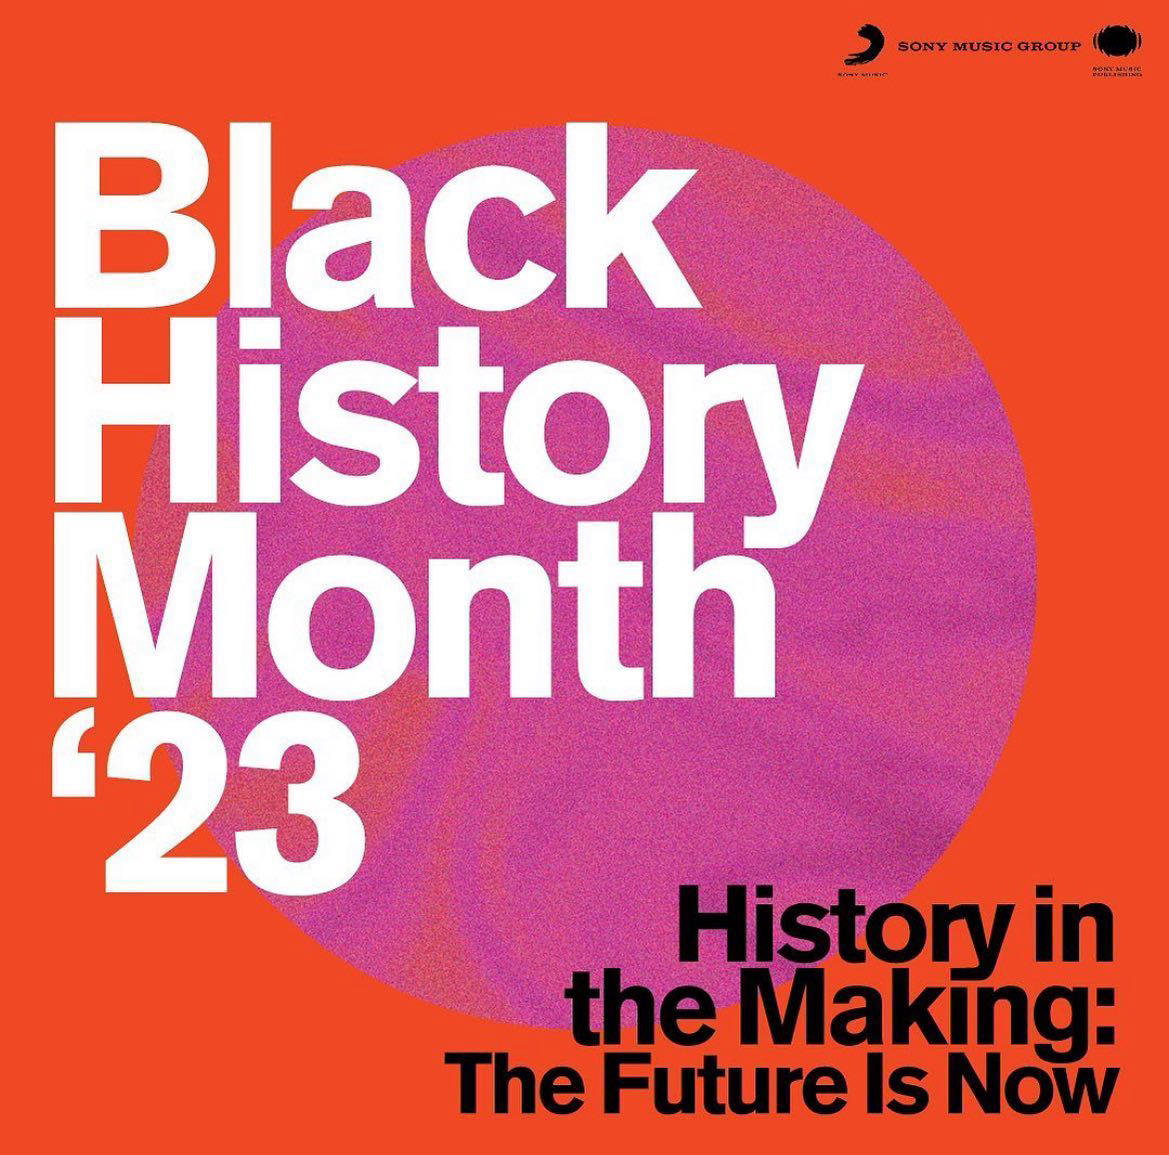 image  1 This Black History Month, Sony Music Group is embracing the theme “History in the Making